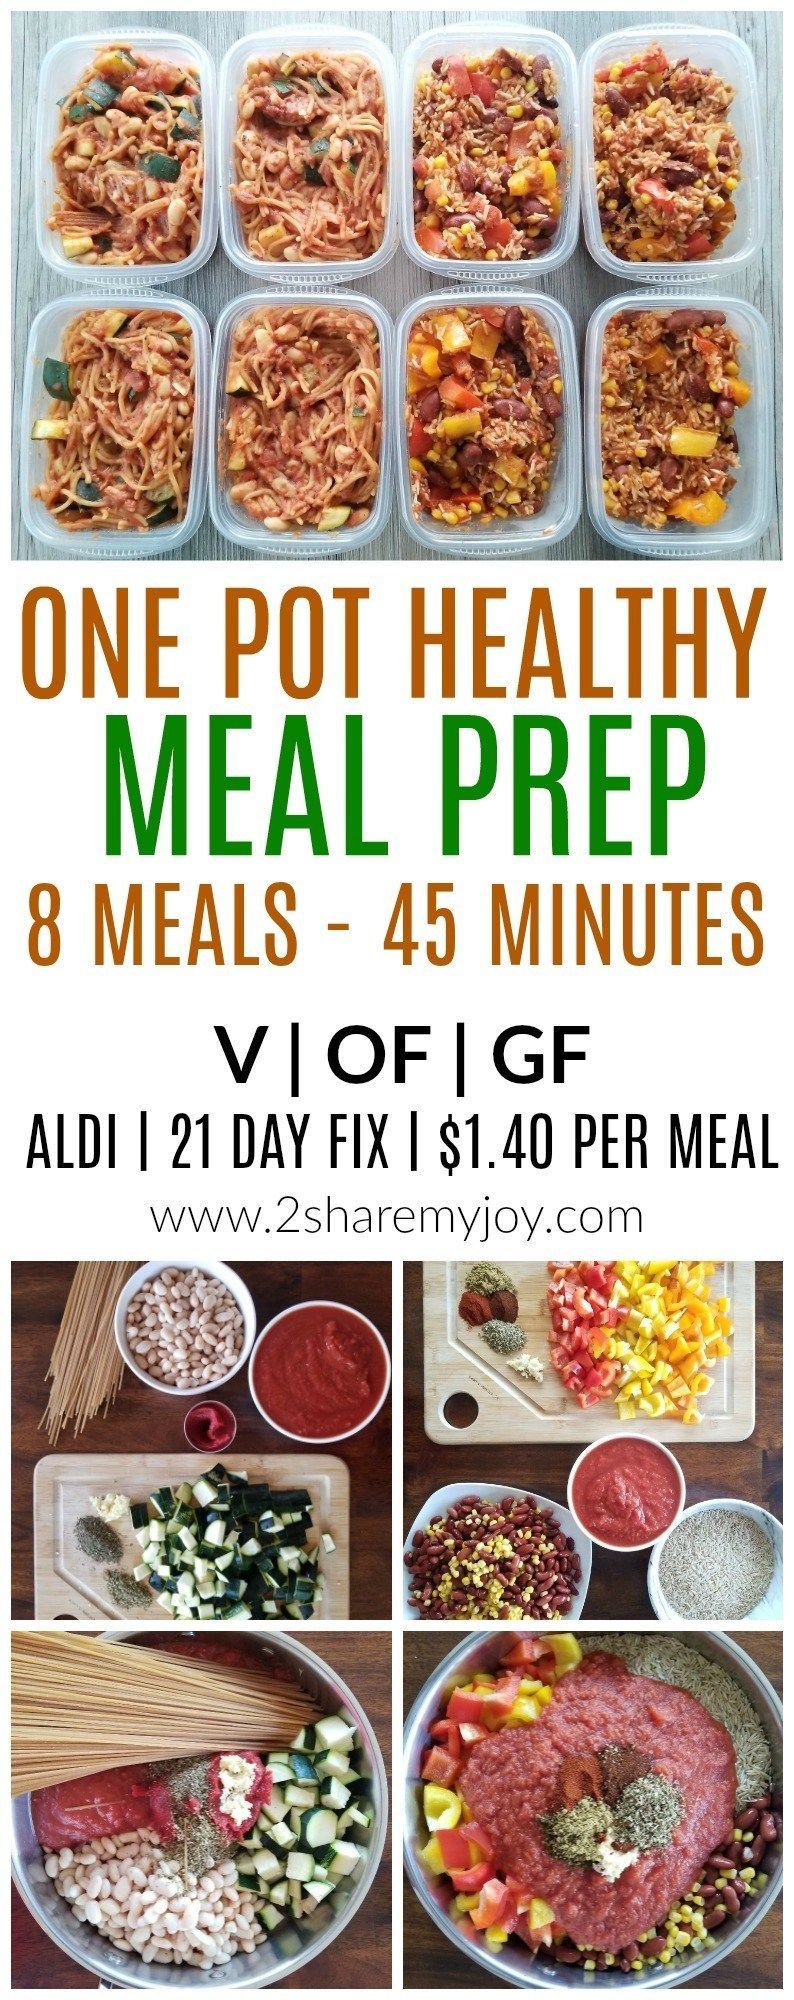 Vegan Meal Prep On A Budget : 8 Meals under 45 Minutes -   18 meal prep recipes for beginners cheap ideas